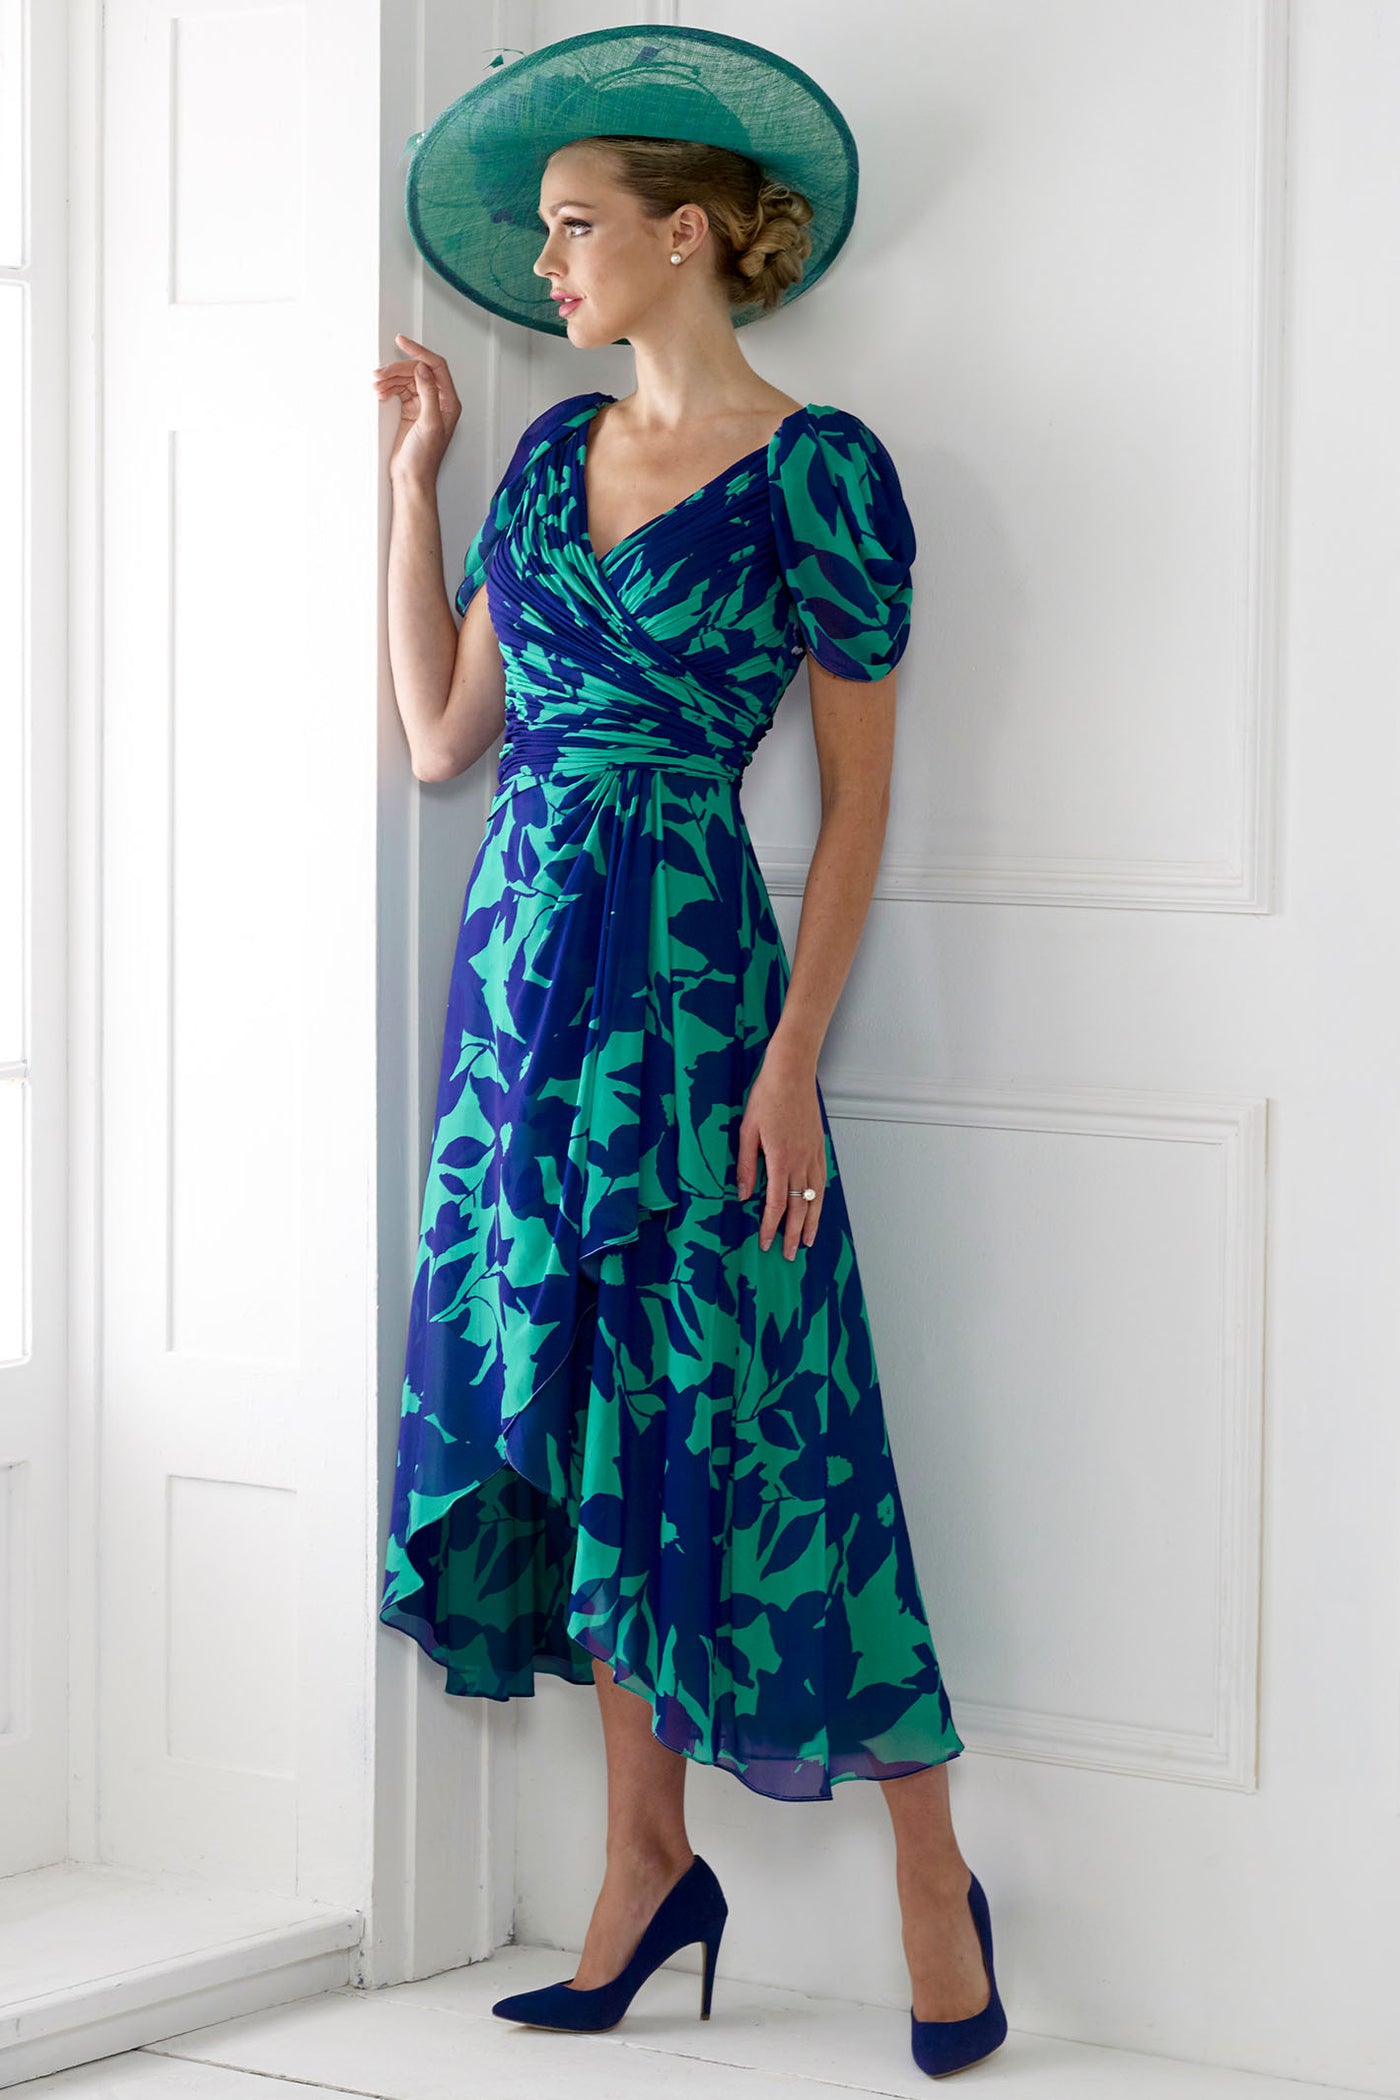 Irresisitble IR7430S Teal Green Blue High Low Chiffon Occasion Dress - Rouge Boutique Inverness